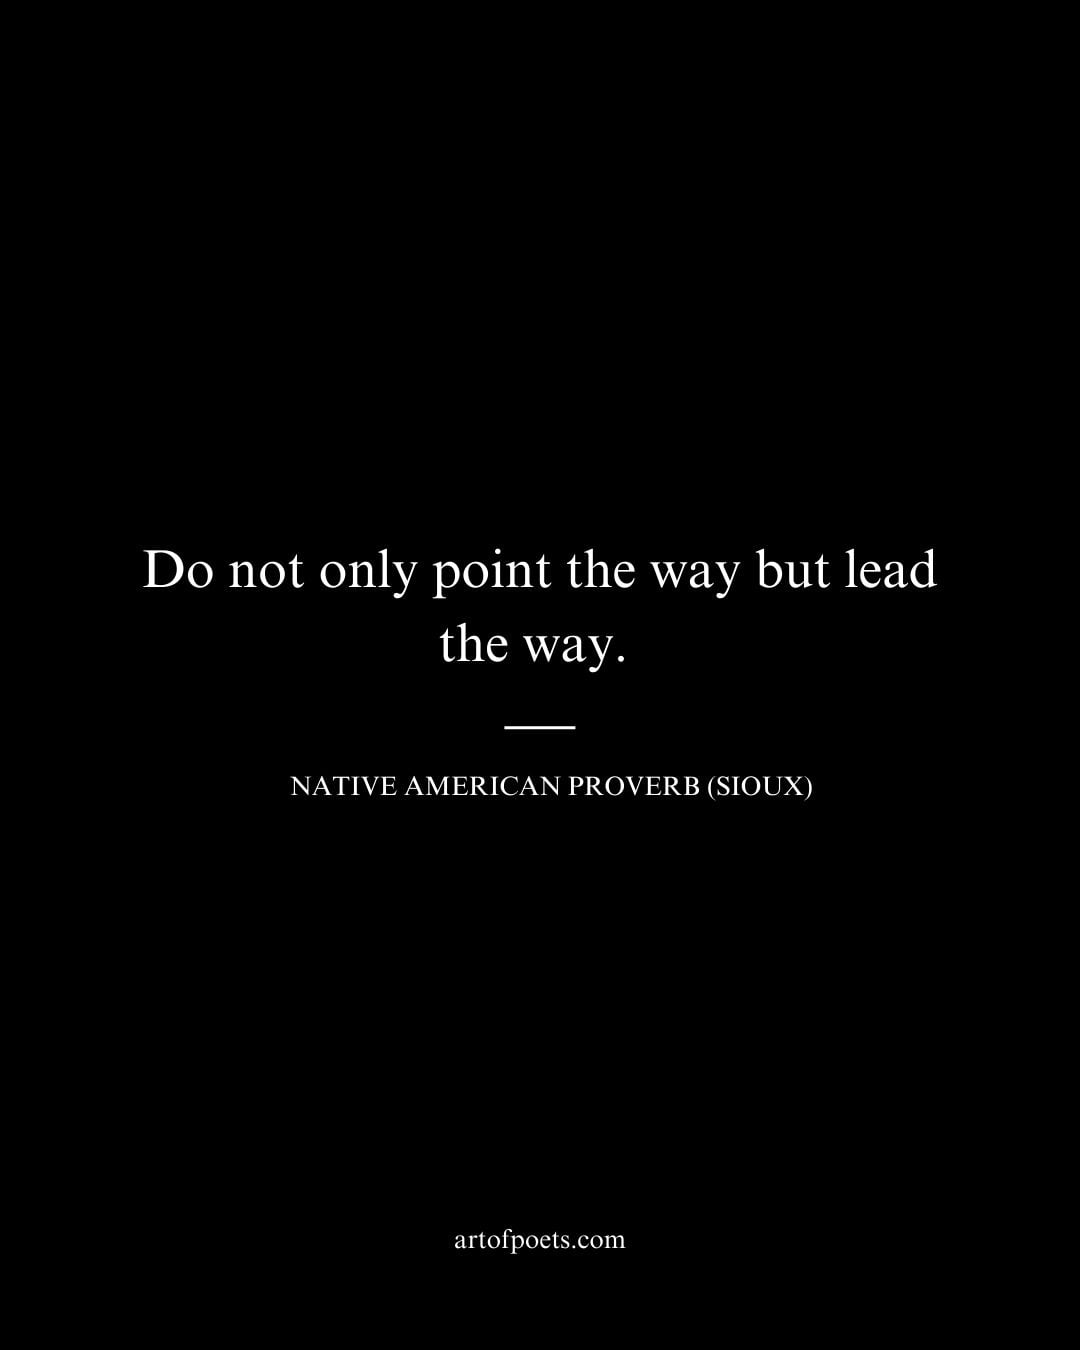 Do not only point the way but lead the way